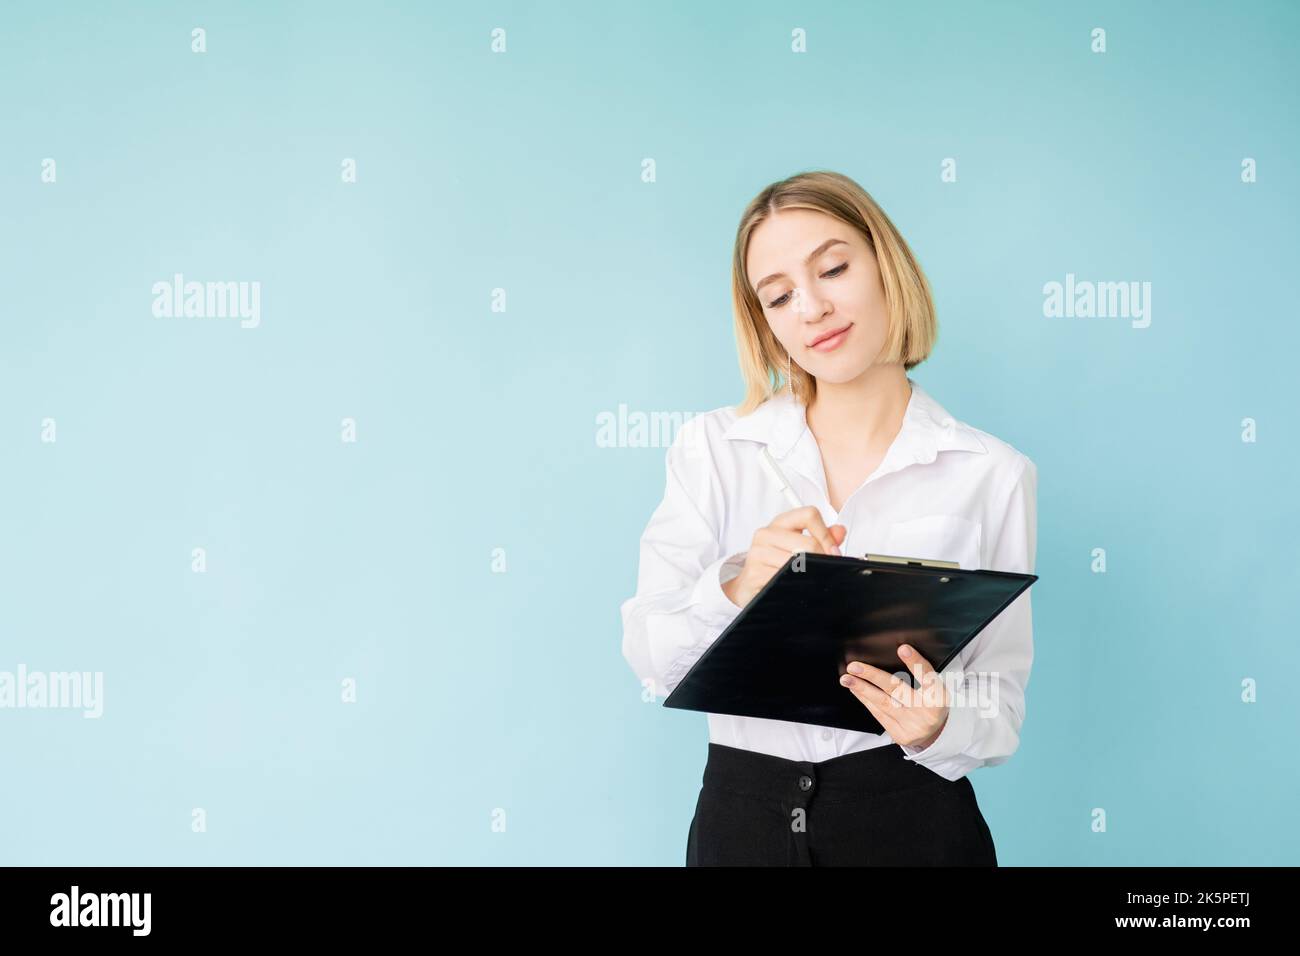 Business project. Happy woman. Important notes. Advertising background. Smiling office lady writing on clipboard in hands isolated blue copy space. Stock Photo